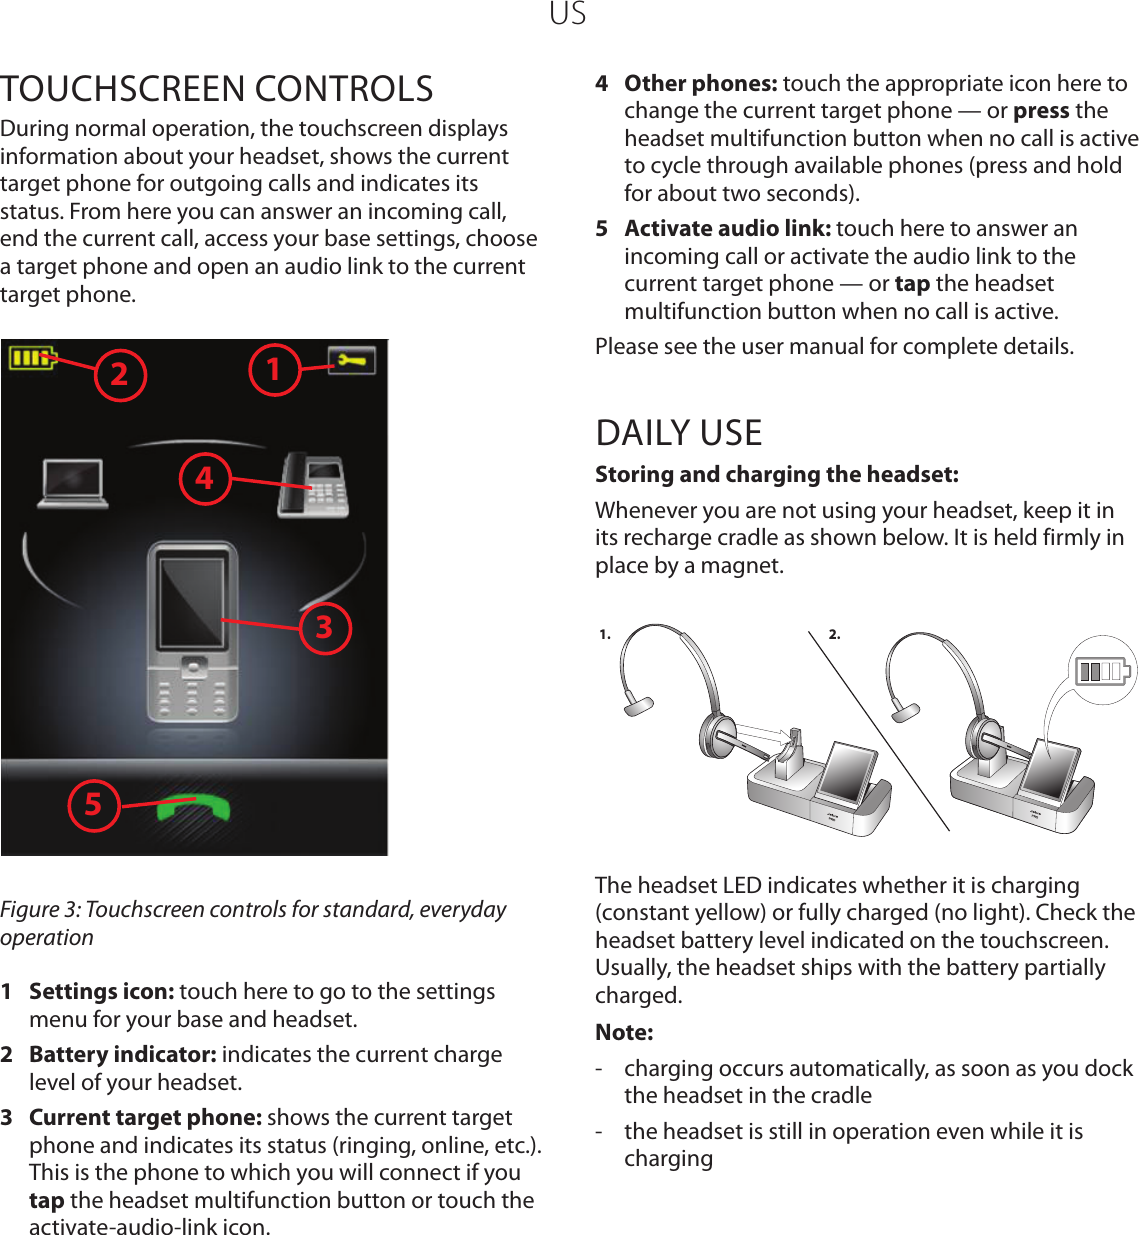 USTOUCHSCREEN CONTROLSDuring normal operation, the touchscreen displays information about your headset, shows the current target phone for outgoing calls and indicates its status. From here you can answer an incoming call, end the current call, access your base settings, choose a target phone and open an audio link to the current target phone. 13245Figure 3: Touchscreen controls for standard, everyday operation1  Settings icon: touch here to go to the settings menu for your base and headset.2  Battery indicator: indicates the current charge level of your headset.3  Current target phone: shows the current target phone and indicates its status (ringing, online, etc.). This is the phone to which you will connect if you tap the headset multifunction button or touch the activate-audio-link icon. 4  Other phones: touch the appropriate icon here to change the current target phone — or press the headset multifunction button when no call is active to cycle through available phones (press and hold for about two seconds).5  Activate audio link: touch here to answer an incoming call or activate the audio link to the current target phone — or tap the headset multifunction button when no call is active.Please see the user manual for complete details.DAILY USEStoring and charging the headset:Whenever you are not using your headset, keep it in its recharge cradle as shown below. It is held firmly in place by a magnet. 1. 2.The headset LED indicates whether it is charging (constant yellow) or fully charged (no light). Check the headset battery level indicated on the touchscreen. Usually, the headset ships with the battery partially charged.Note:-  charging occurs automatically, as soon as you dock the headset in the cradle-  the headset is still in operation even while it is charging